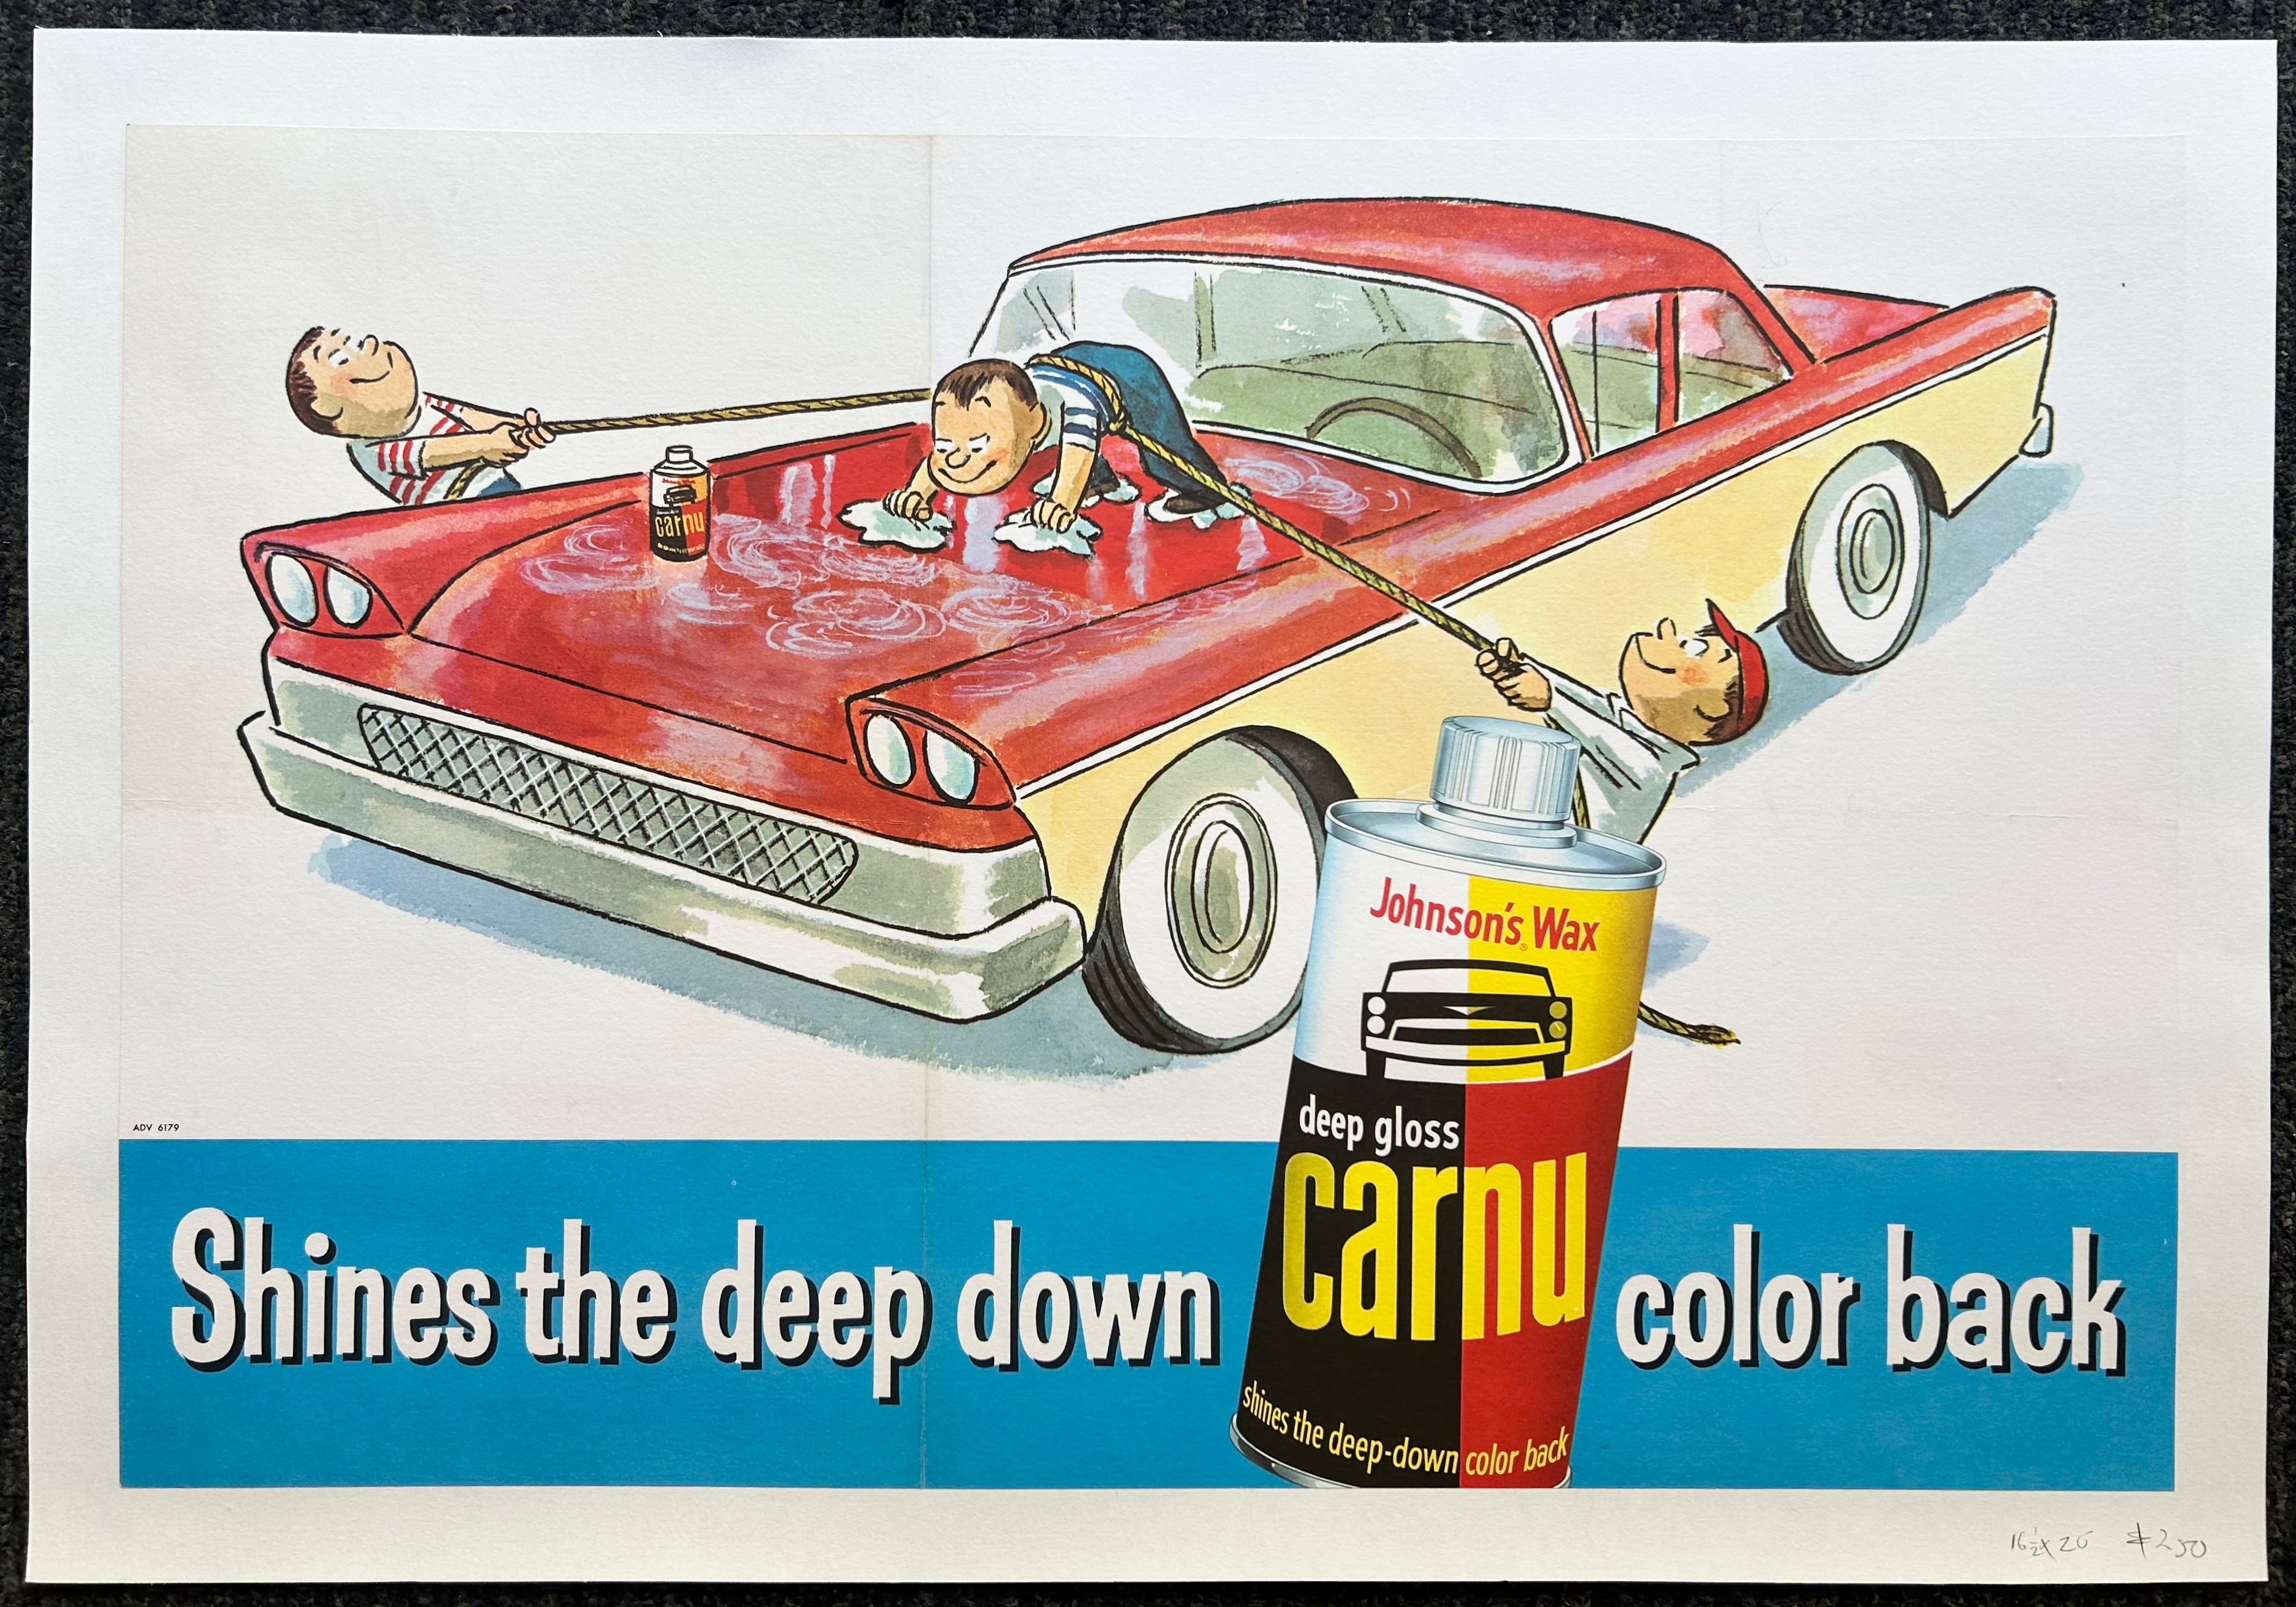 Blue border on the bottom with text and an image of the wax can. A drawing of a boy on top of a red car waxing while two boys hold him up with a rope. 